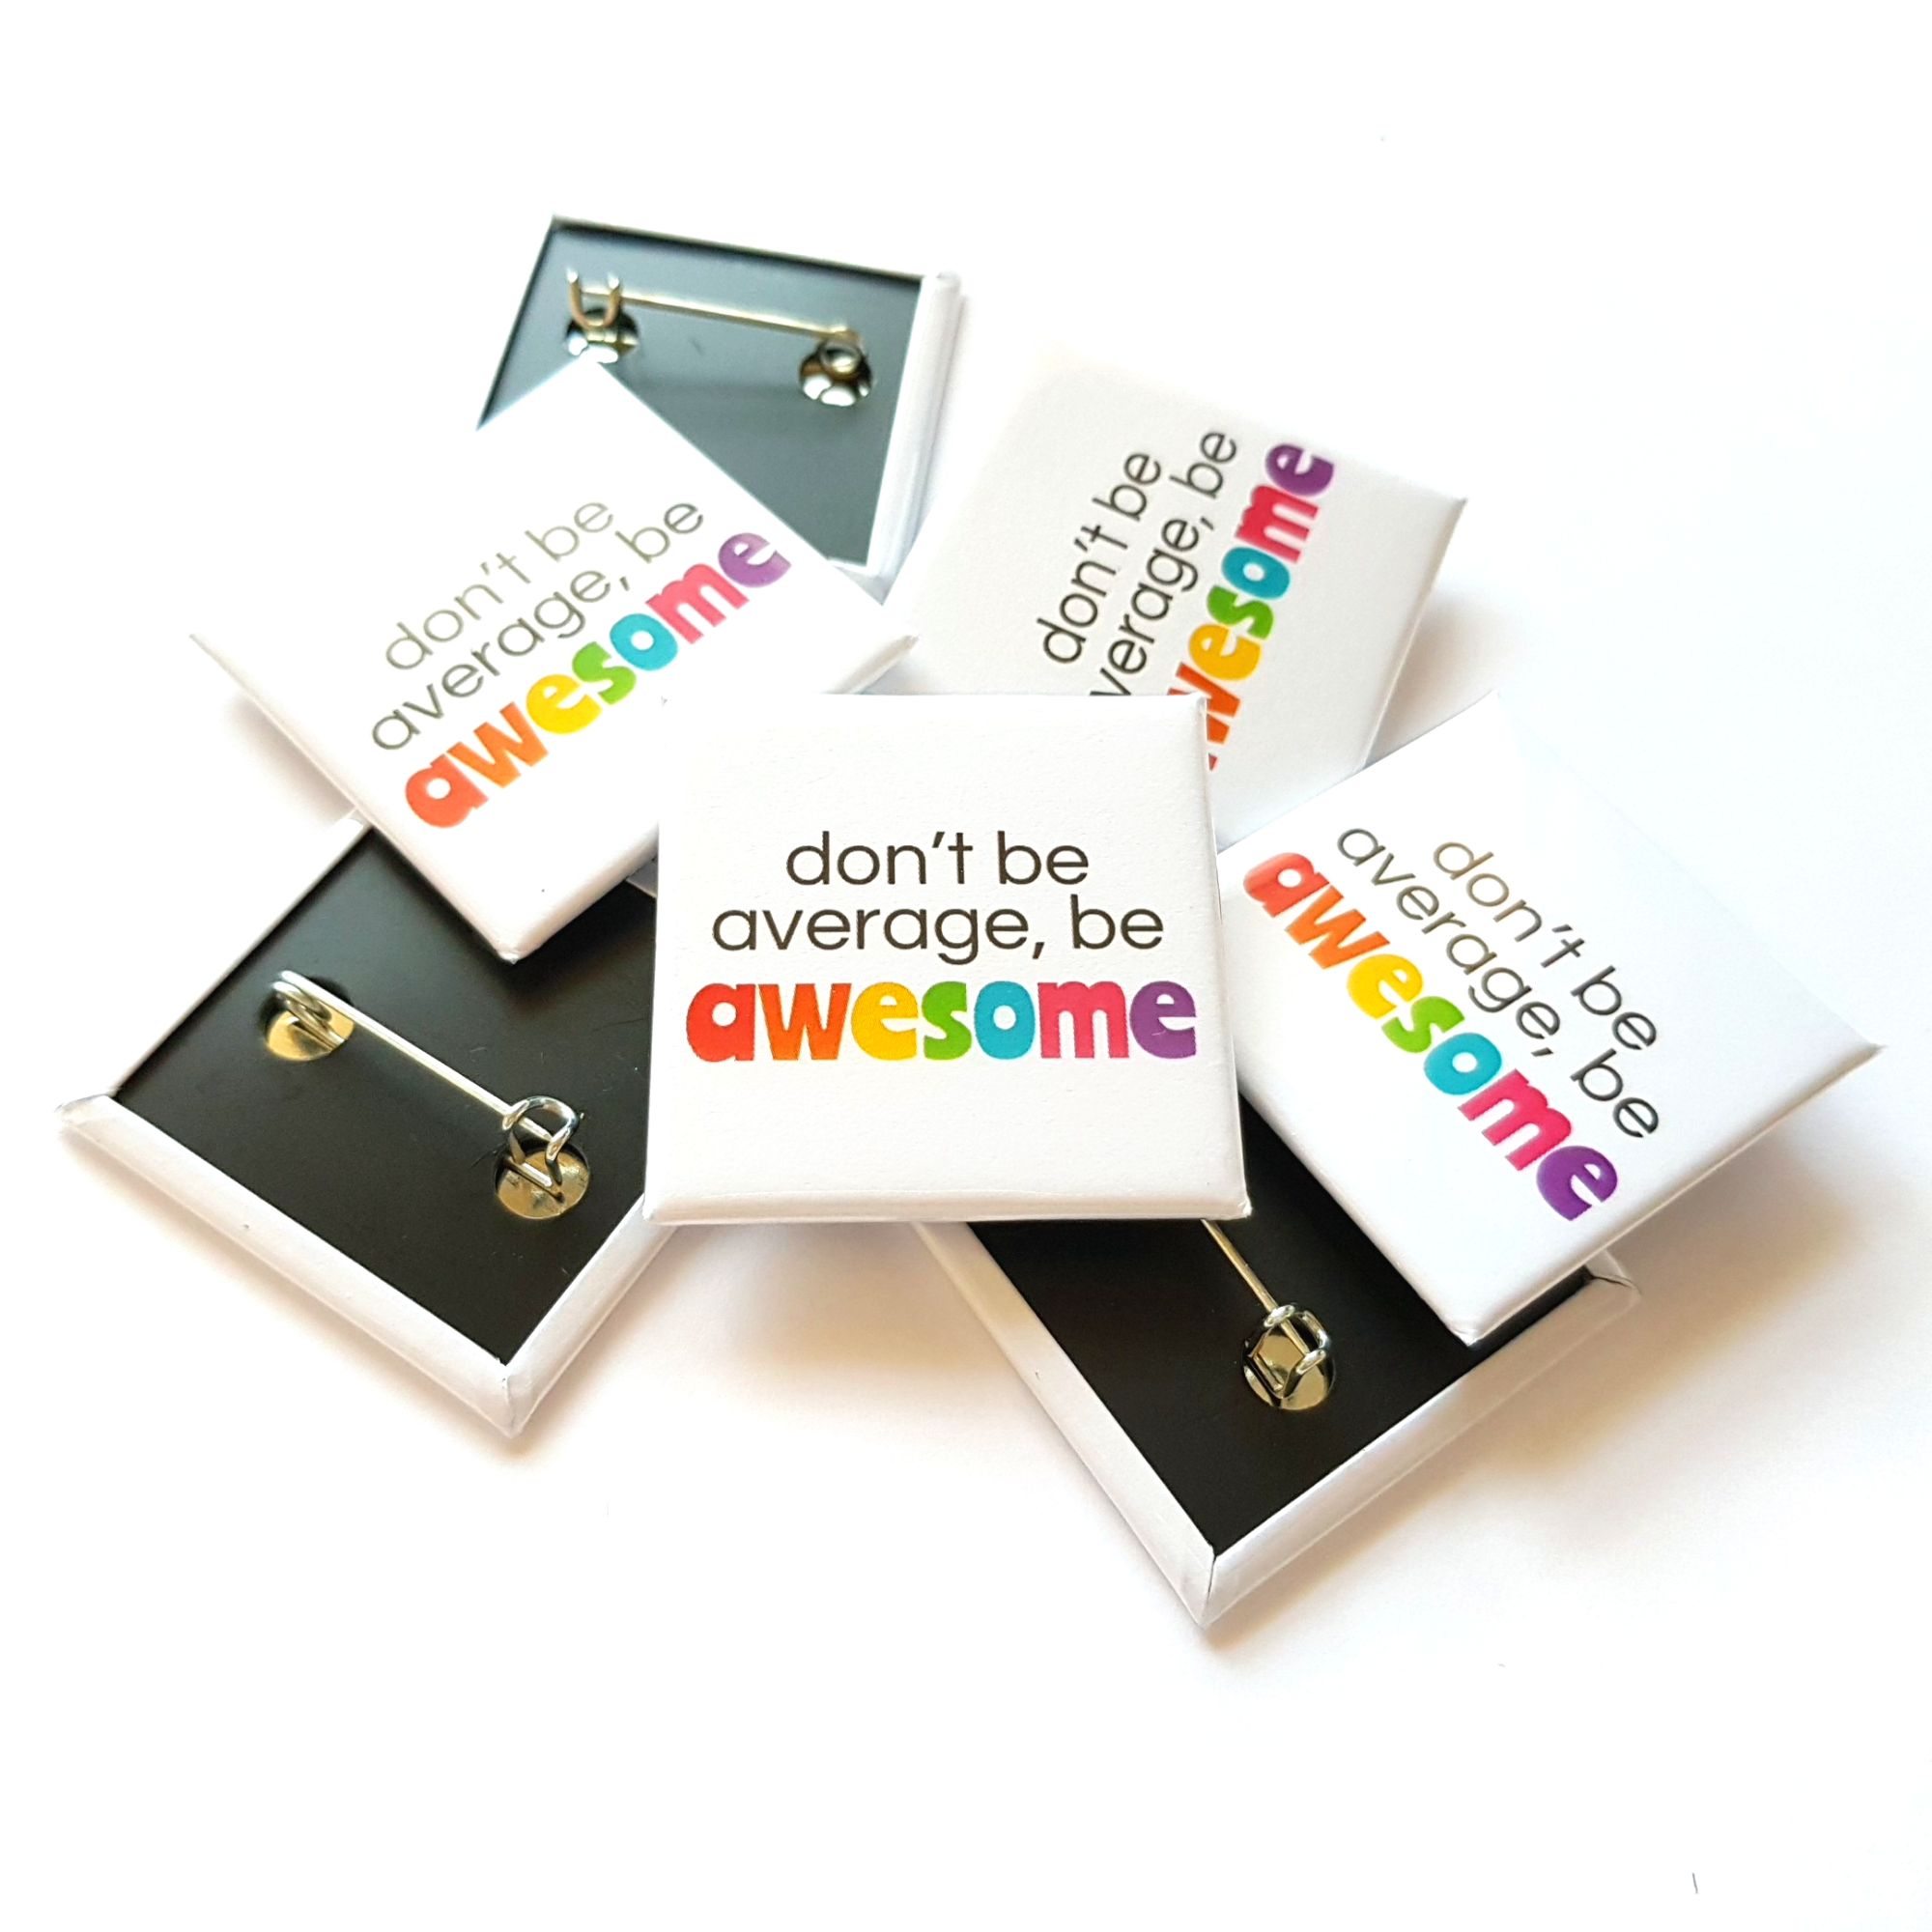 A pile of white square badges with rainbow writing, featuring the phrase 'don't be average, be awesome'